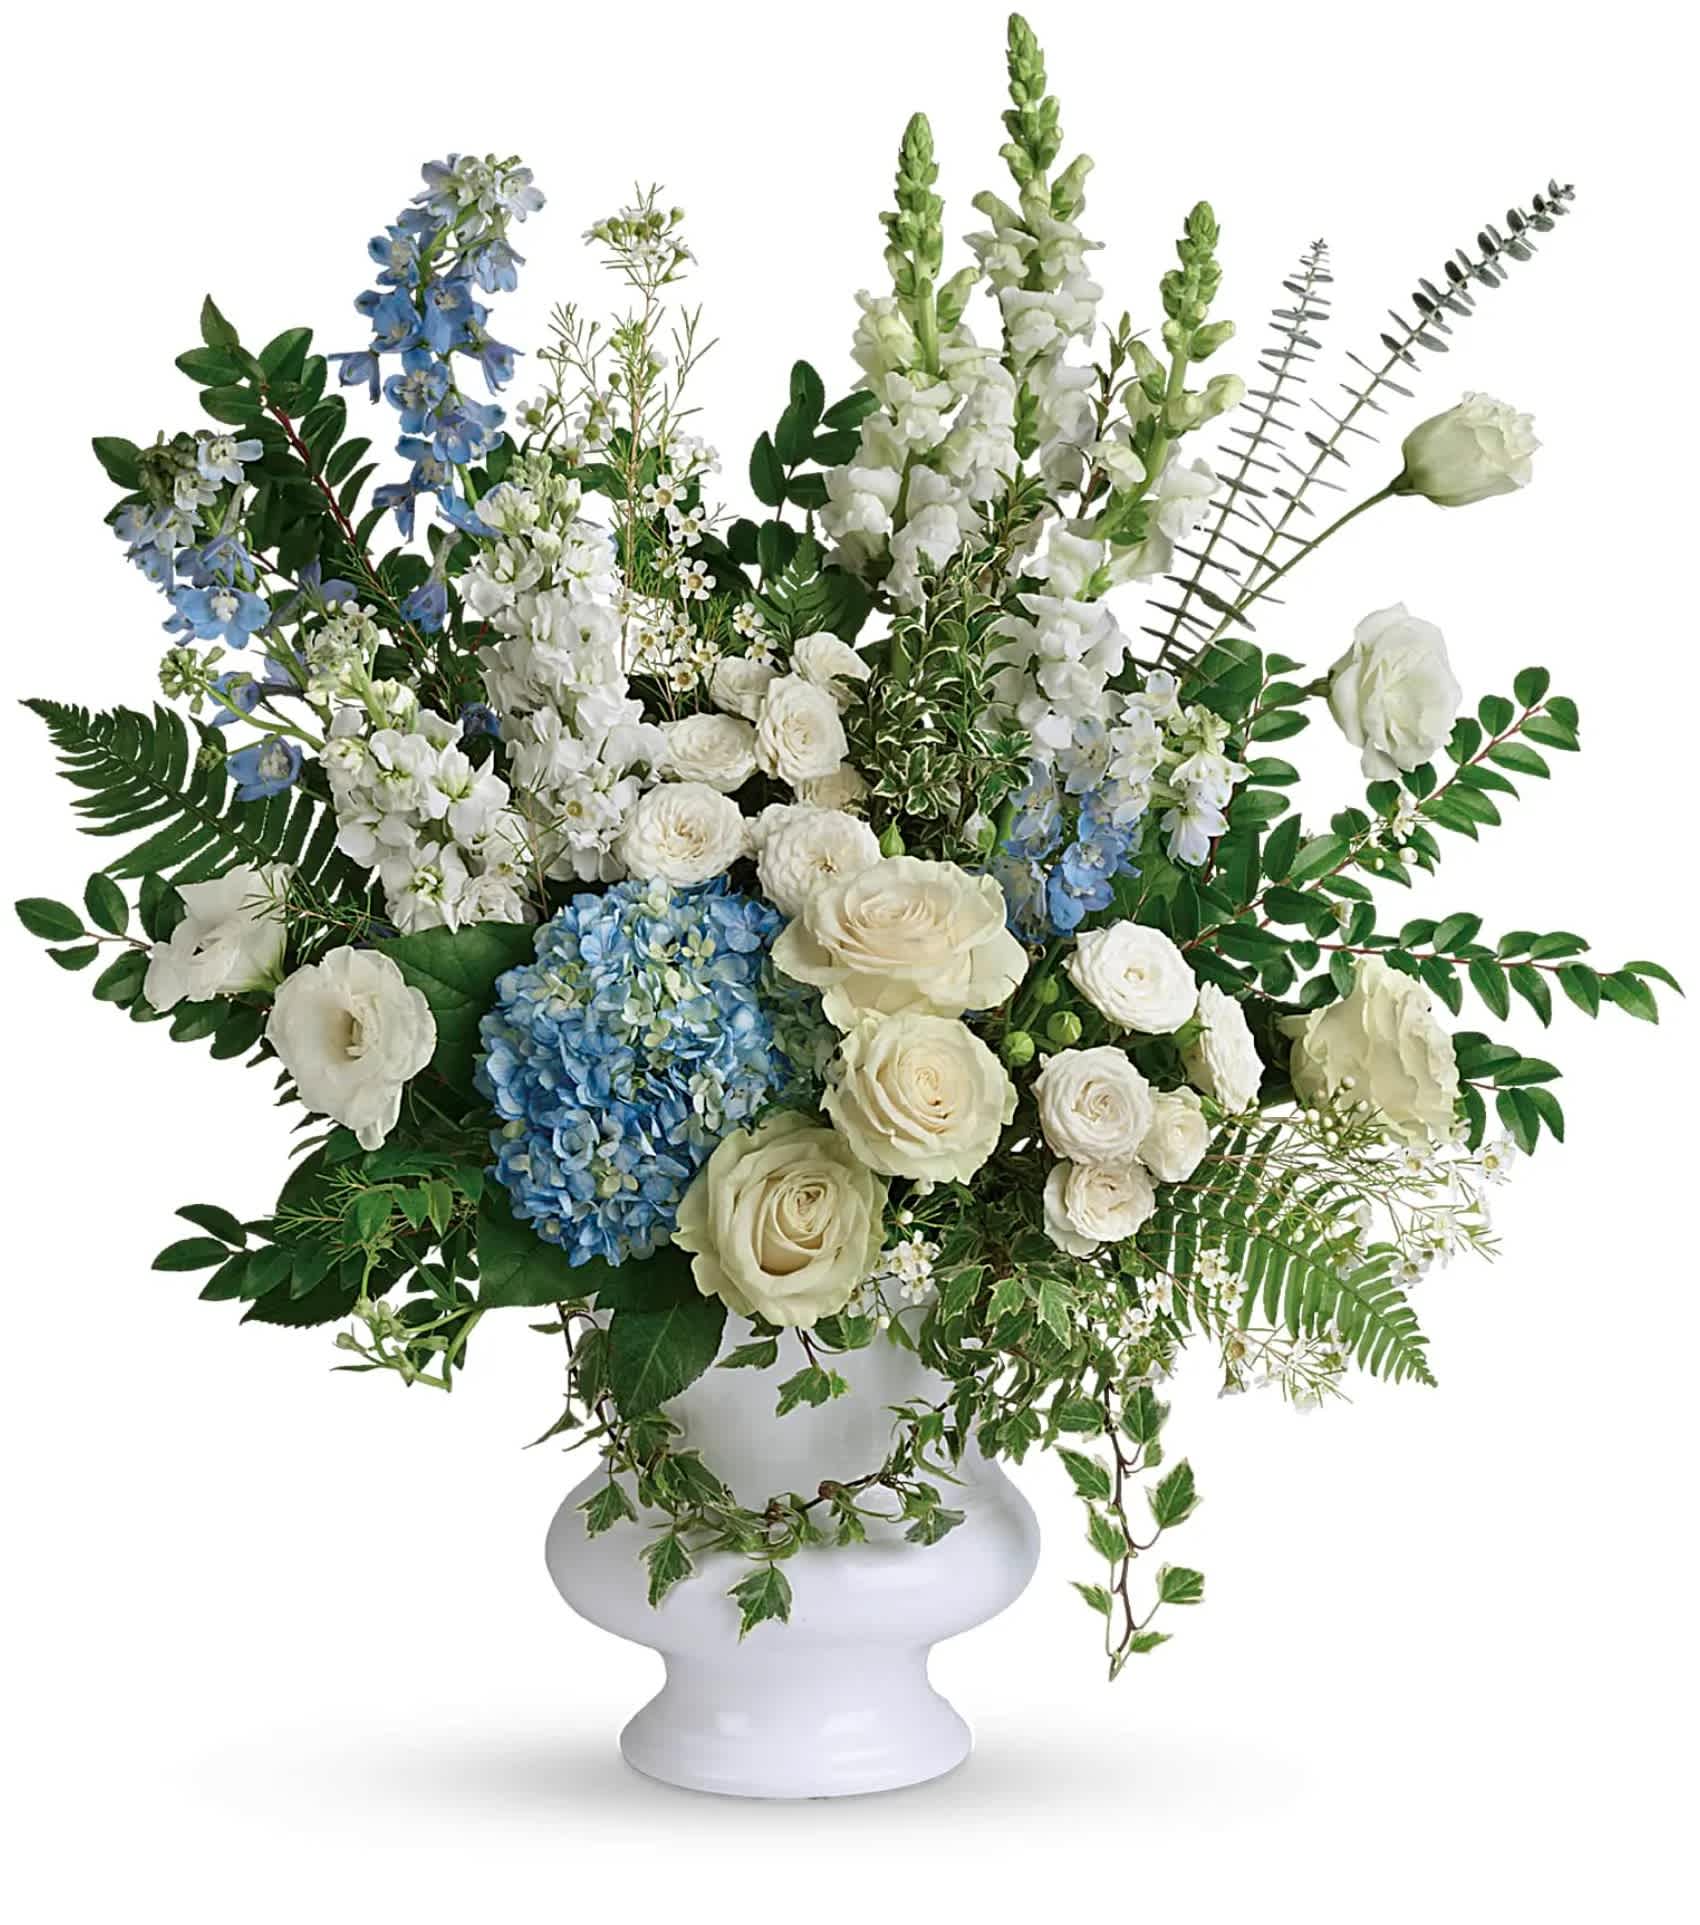 Treasured And Beloved Bouquet - A treasured tribute to your beloved, this gorgeously grand bouquet of soft blue hydrangea and pure white roses is reminiscent of a clear sky, a hopeful reminder of life and love.  This beautiful bouquet of light blue hydrangea, white roses, white spray roses, white lisianthus, light blue delphinium, white snapdragons, white stock, and white waxflower is accented with huckleberry, variegated ivy, spiral eucalyptus, dagger fern, and lemon leaf. Delivered in a white designer urn.   Approximately 27 1/2&quot; W x 29 1/4&quot; H